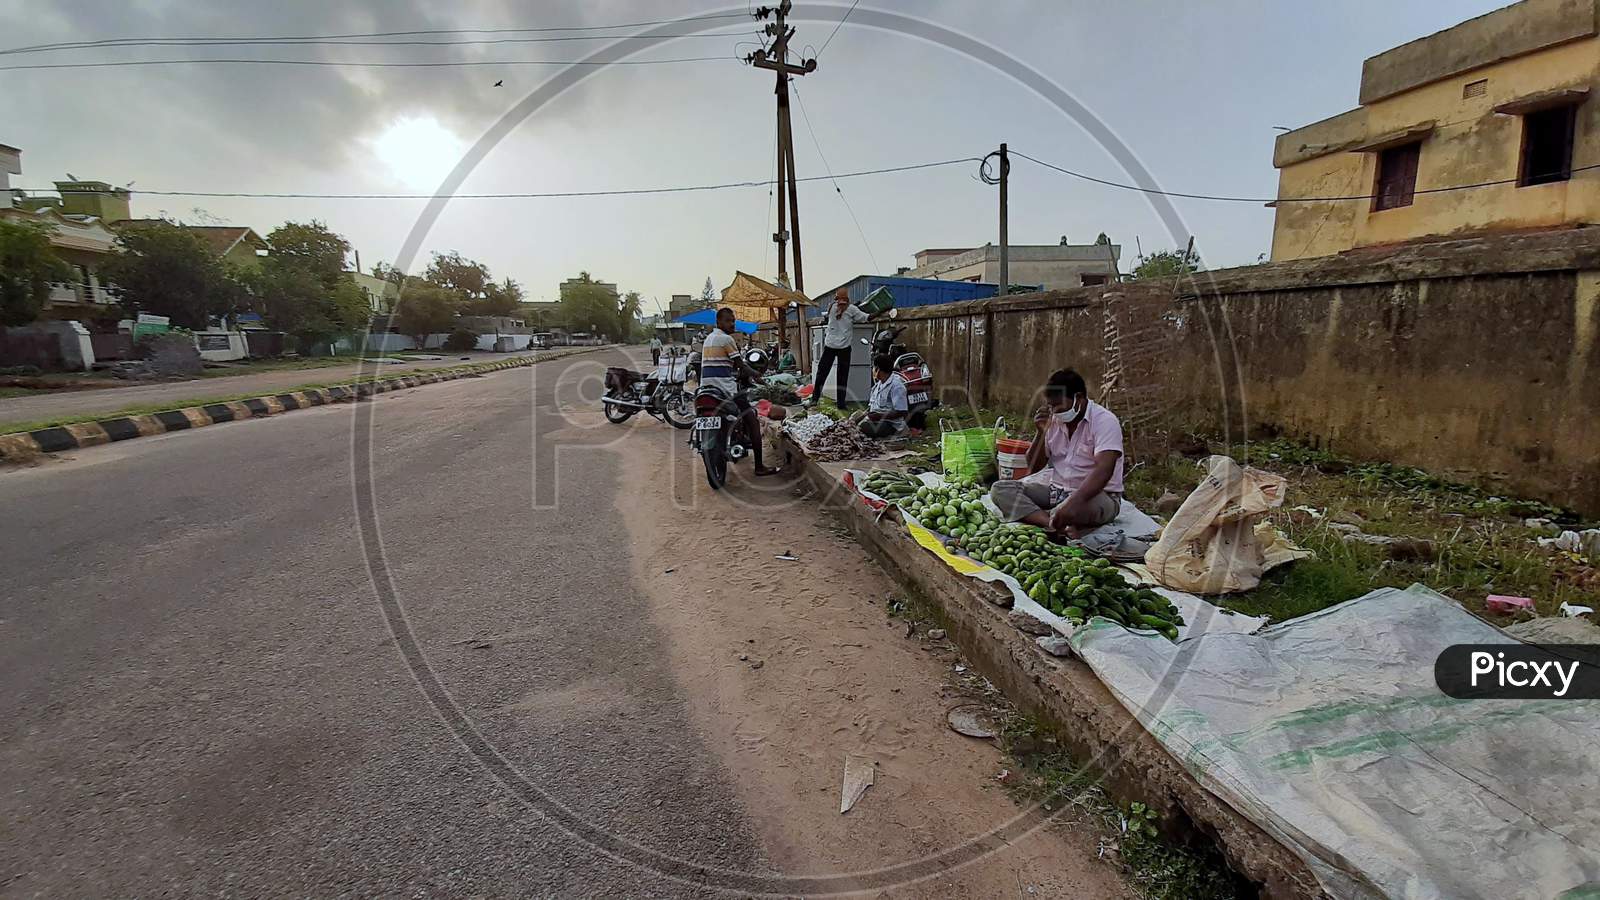 Vegetable market on the  road side during Lockdown period